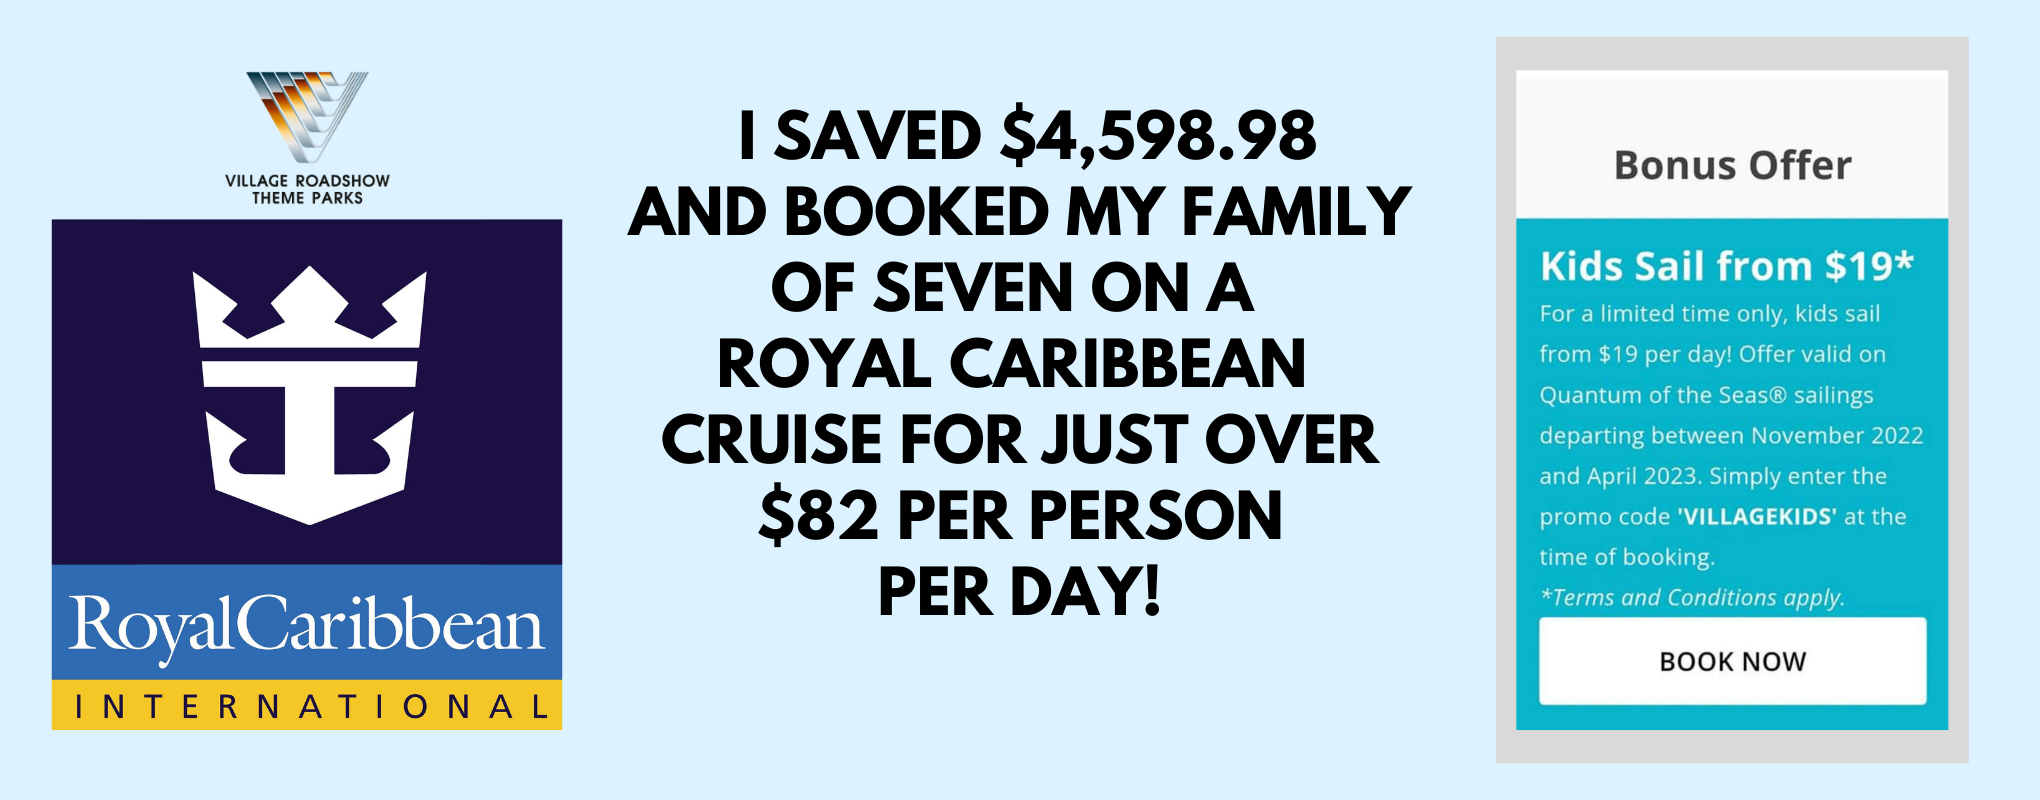 I Saved Over $4,500 On My Cruise For 7 People!